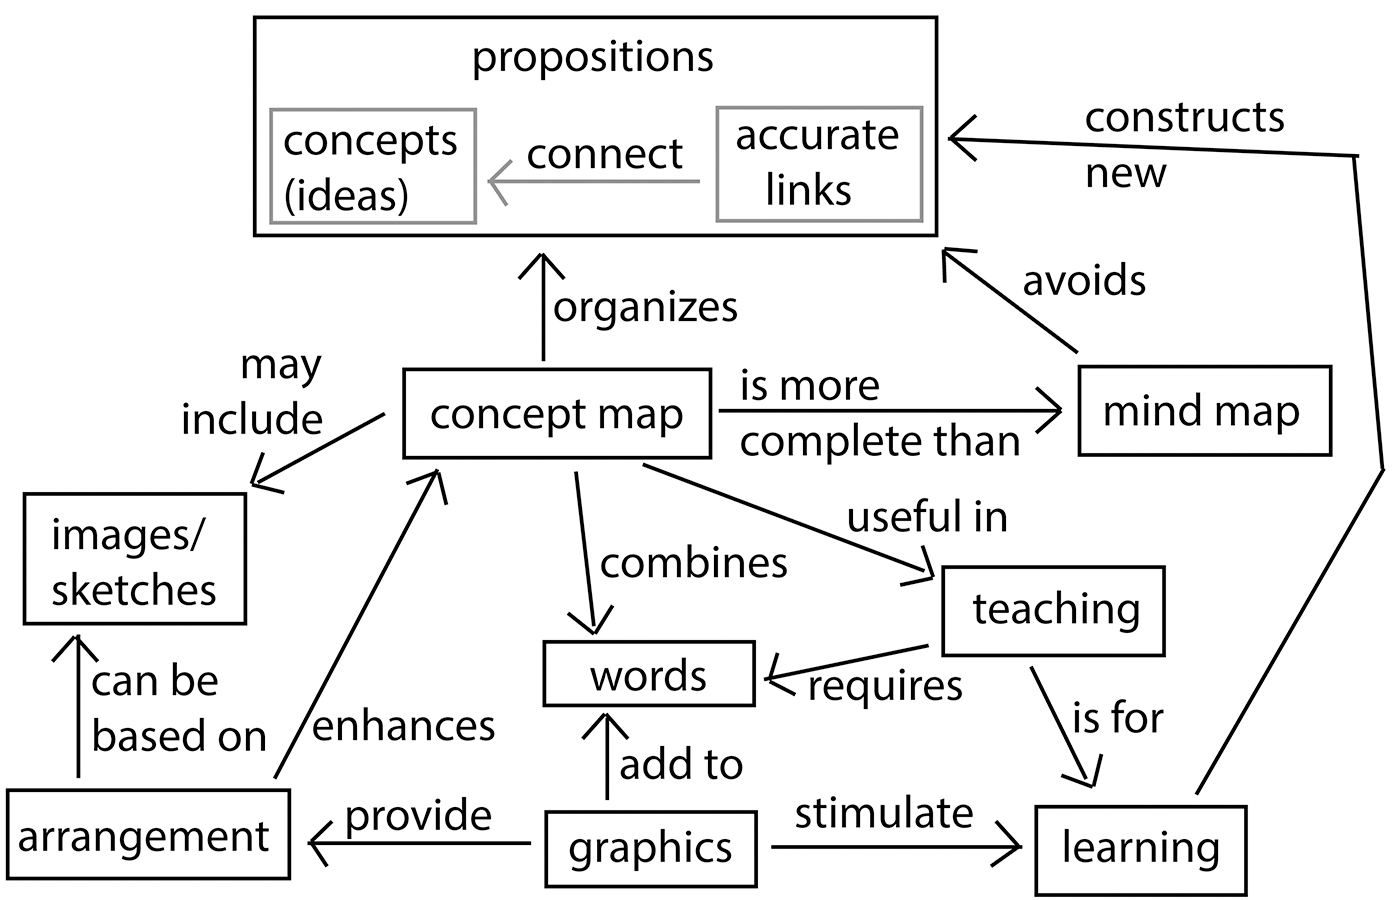 A concept map on concept maps. Boxed ideas (or concepts) are linked by labeled arrows; two linked ideas become one proposition.